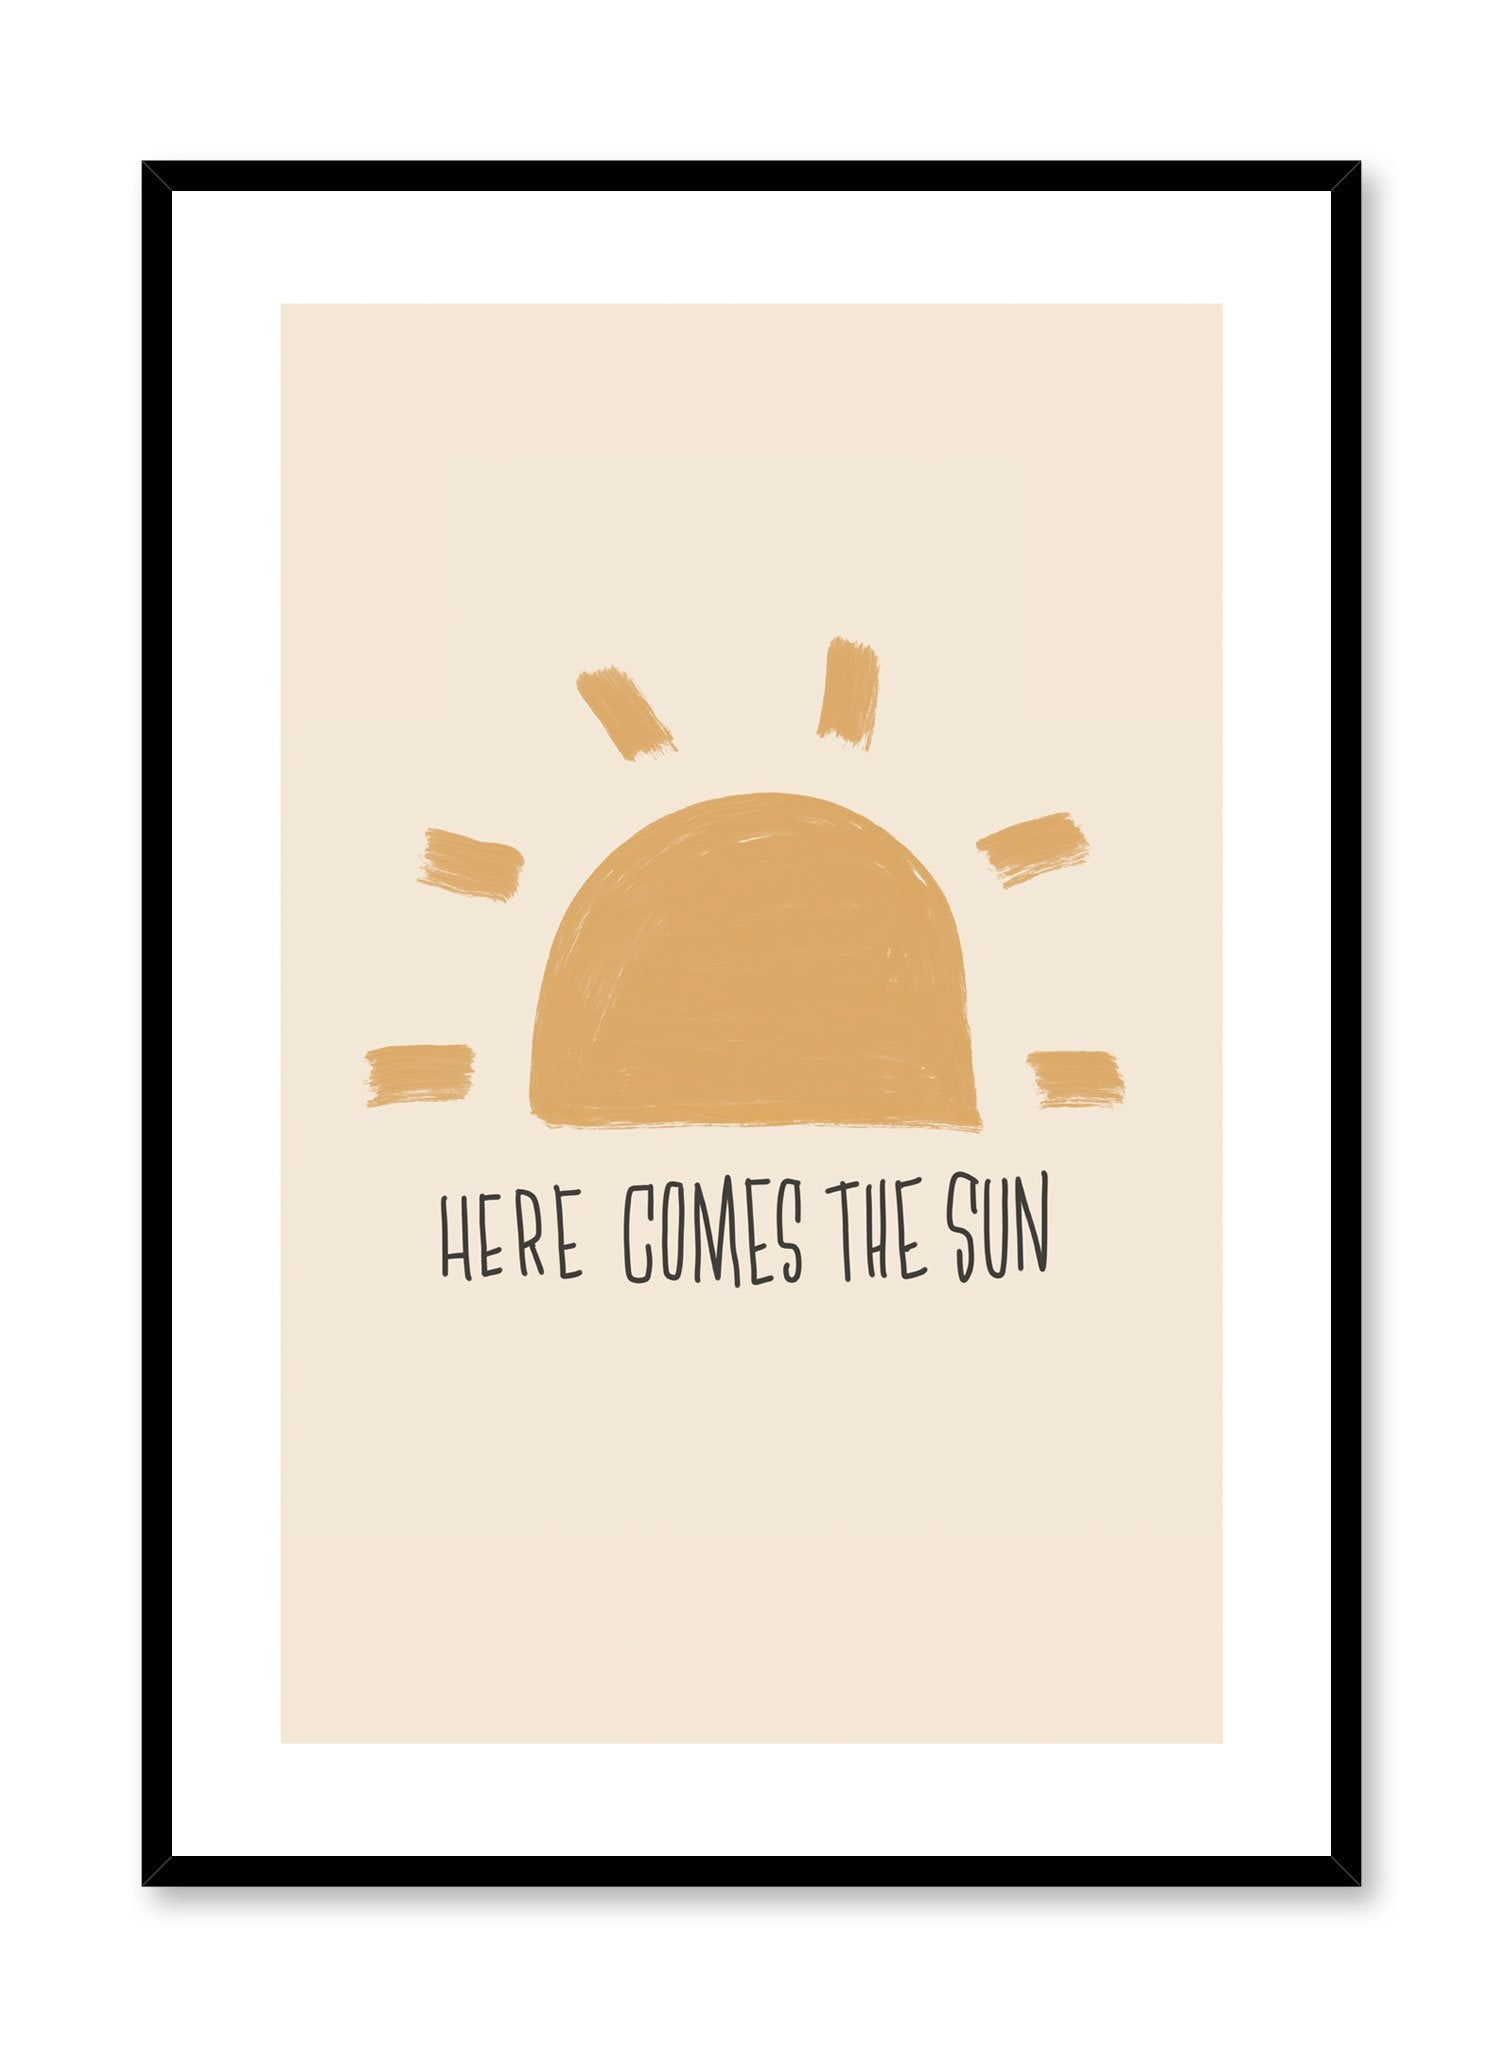 Here Comes the Sun is a minimalist typography by Opposite Wall of a big bright sun with the words "Here Comes the Sun" at the bottom. 